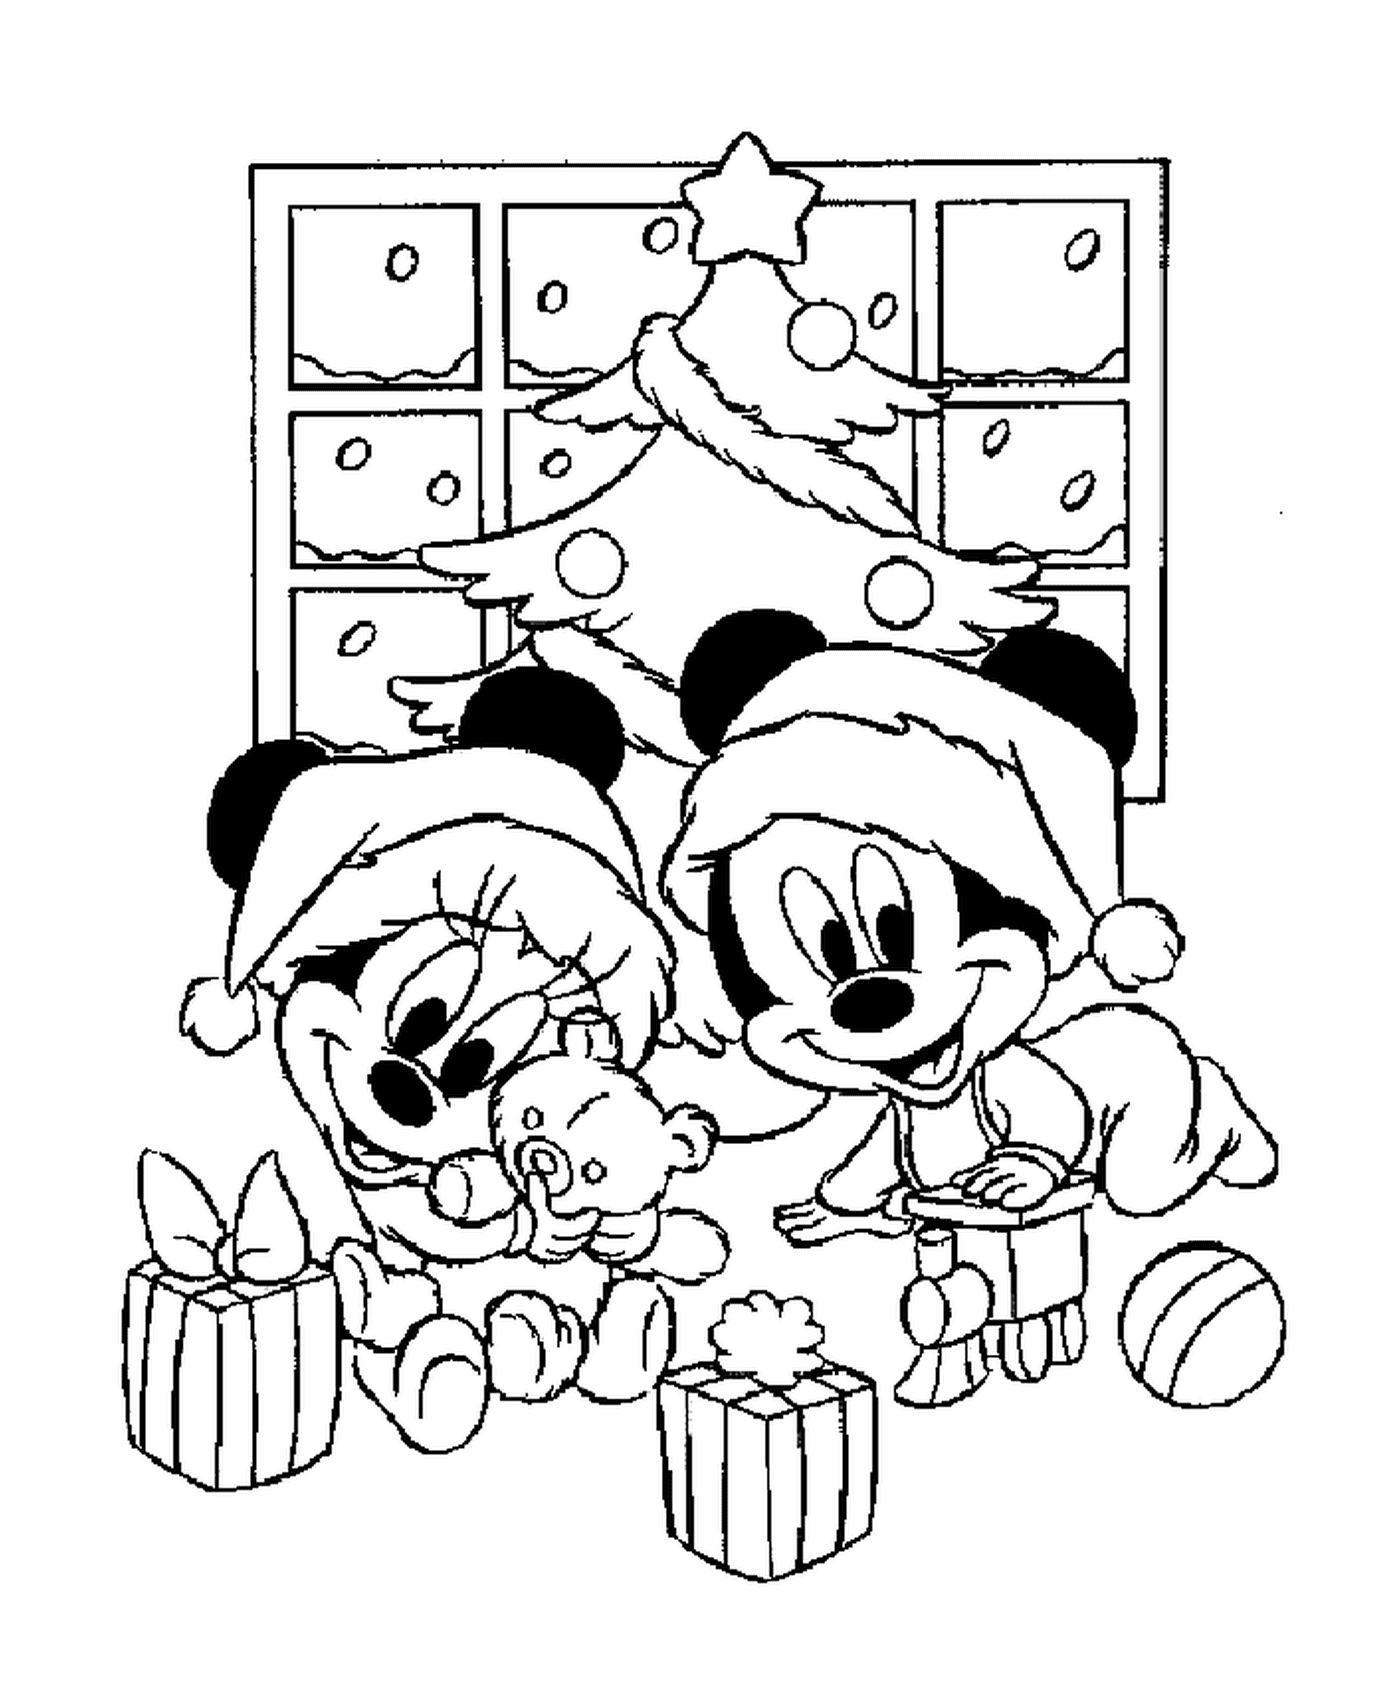  Babies Mickey and Minnie playing with their presents in front of the tree 